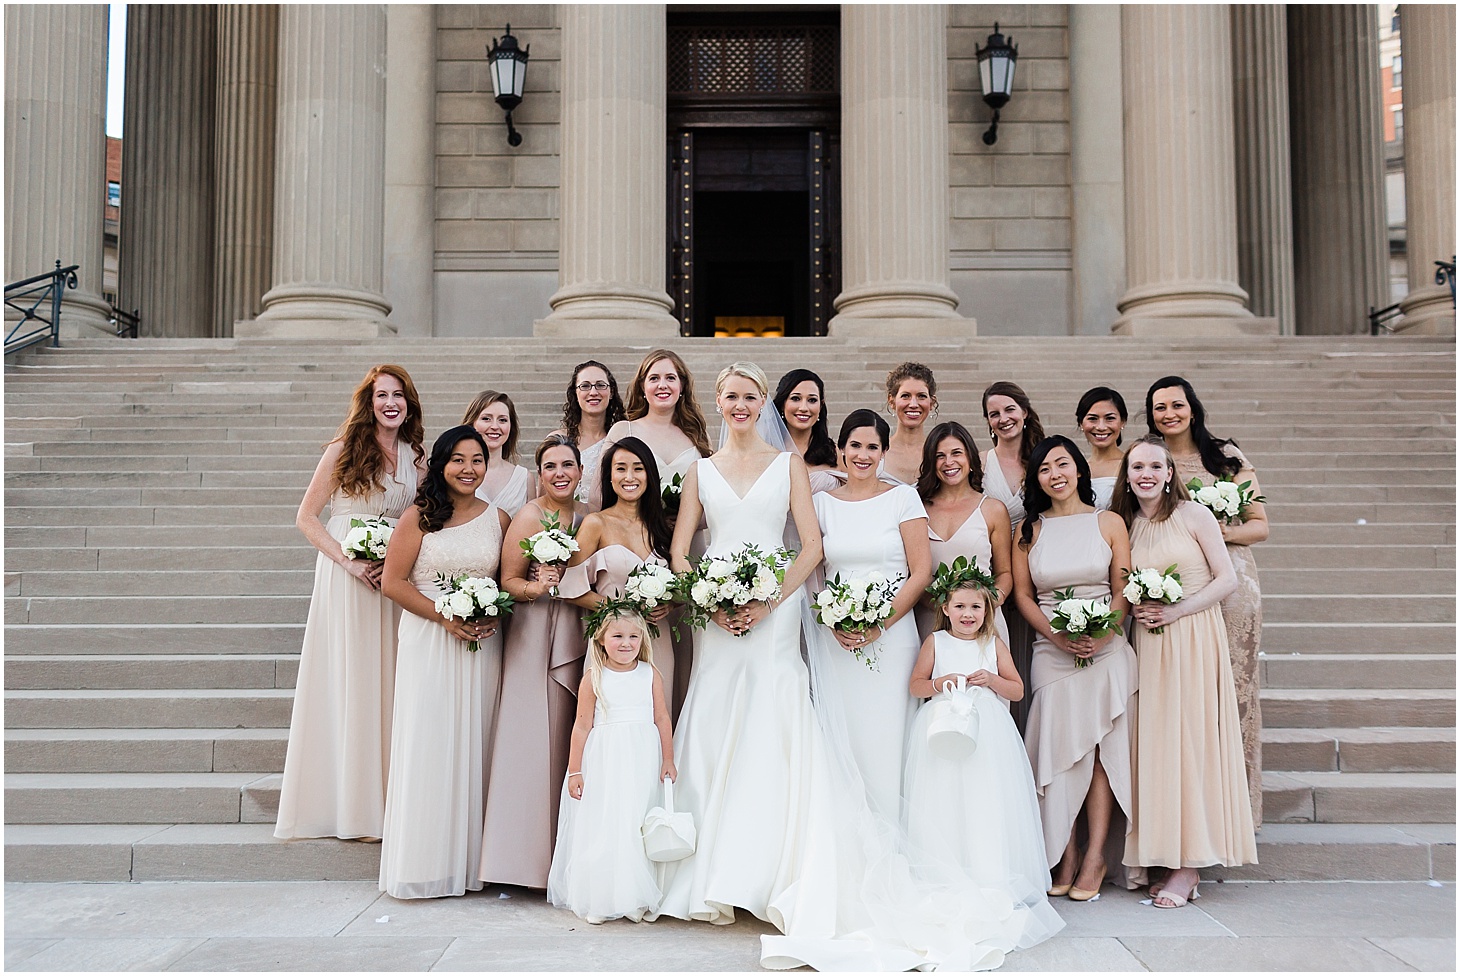 Traditional Southern House Party, Champagne-toned Multicultural Wedding at the Hay-Adams Hotel, Ceremony at National City Christian Church, Sarah Bradshaw Photography, DC Wedding Photographer